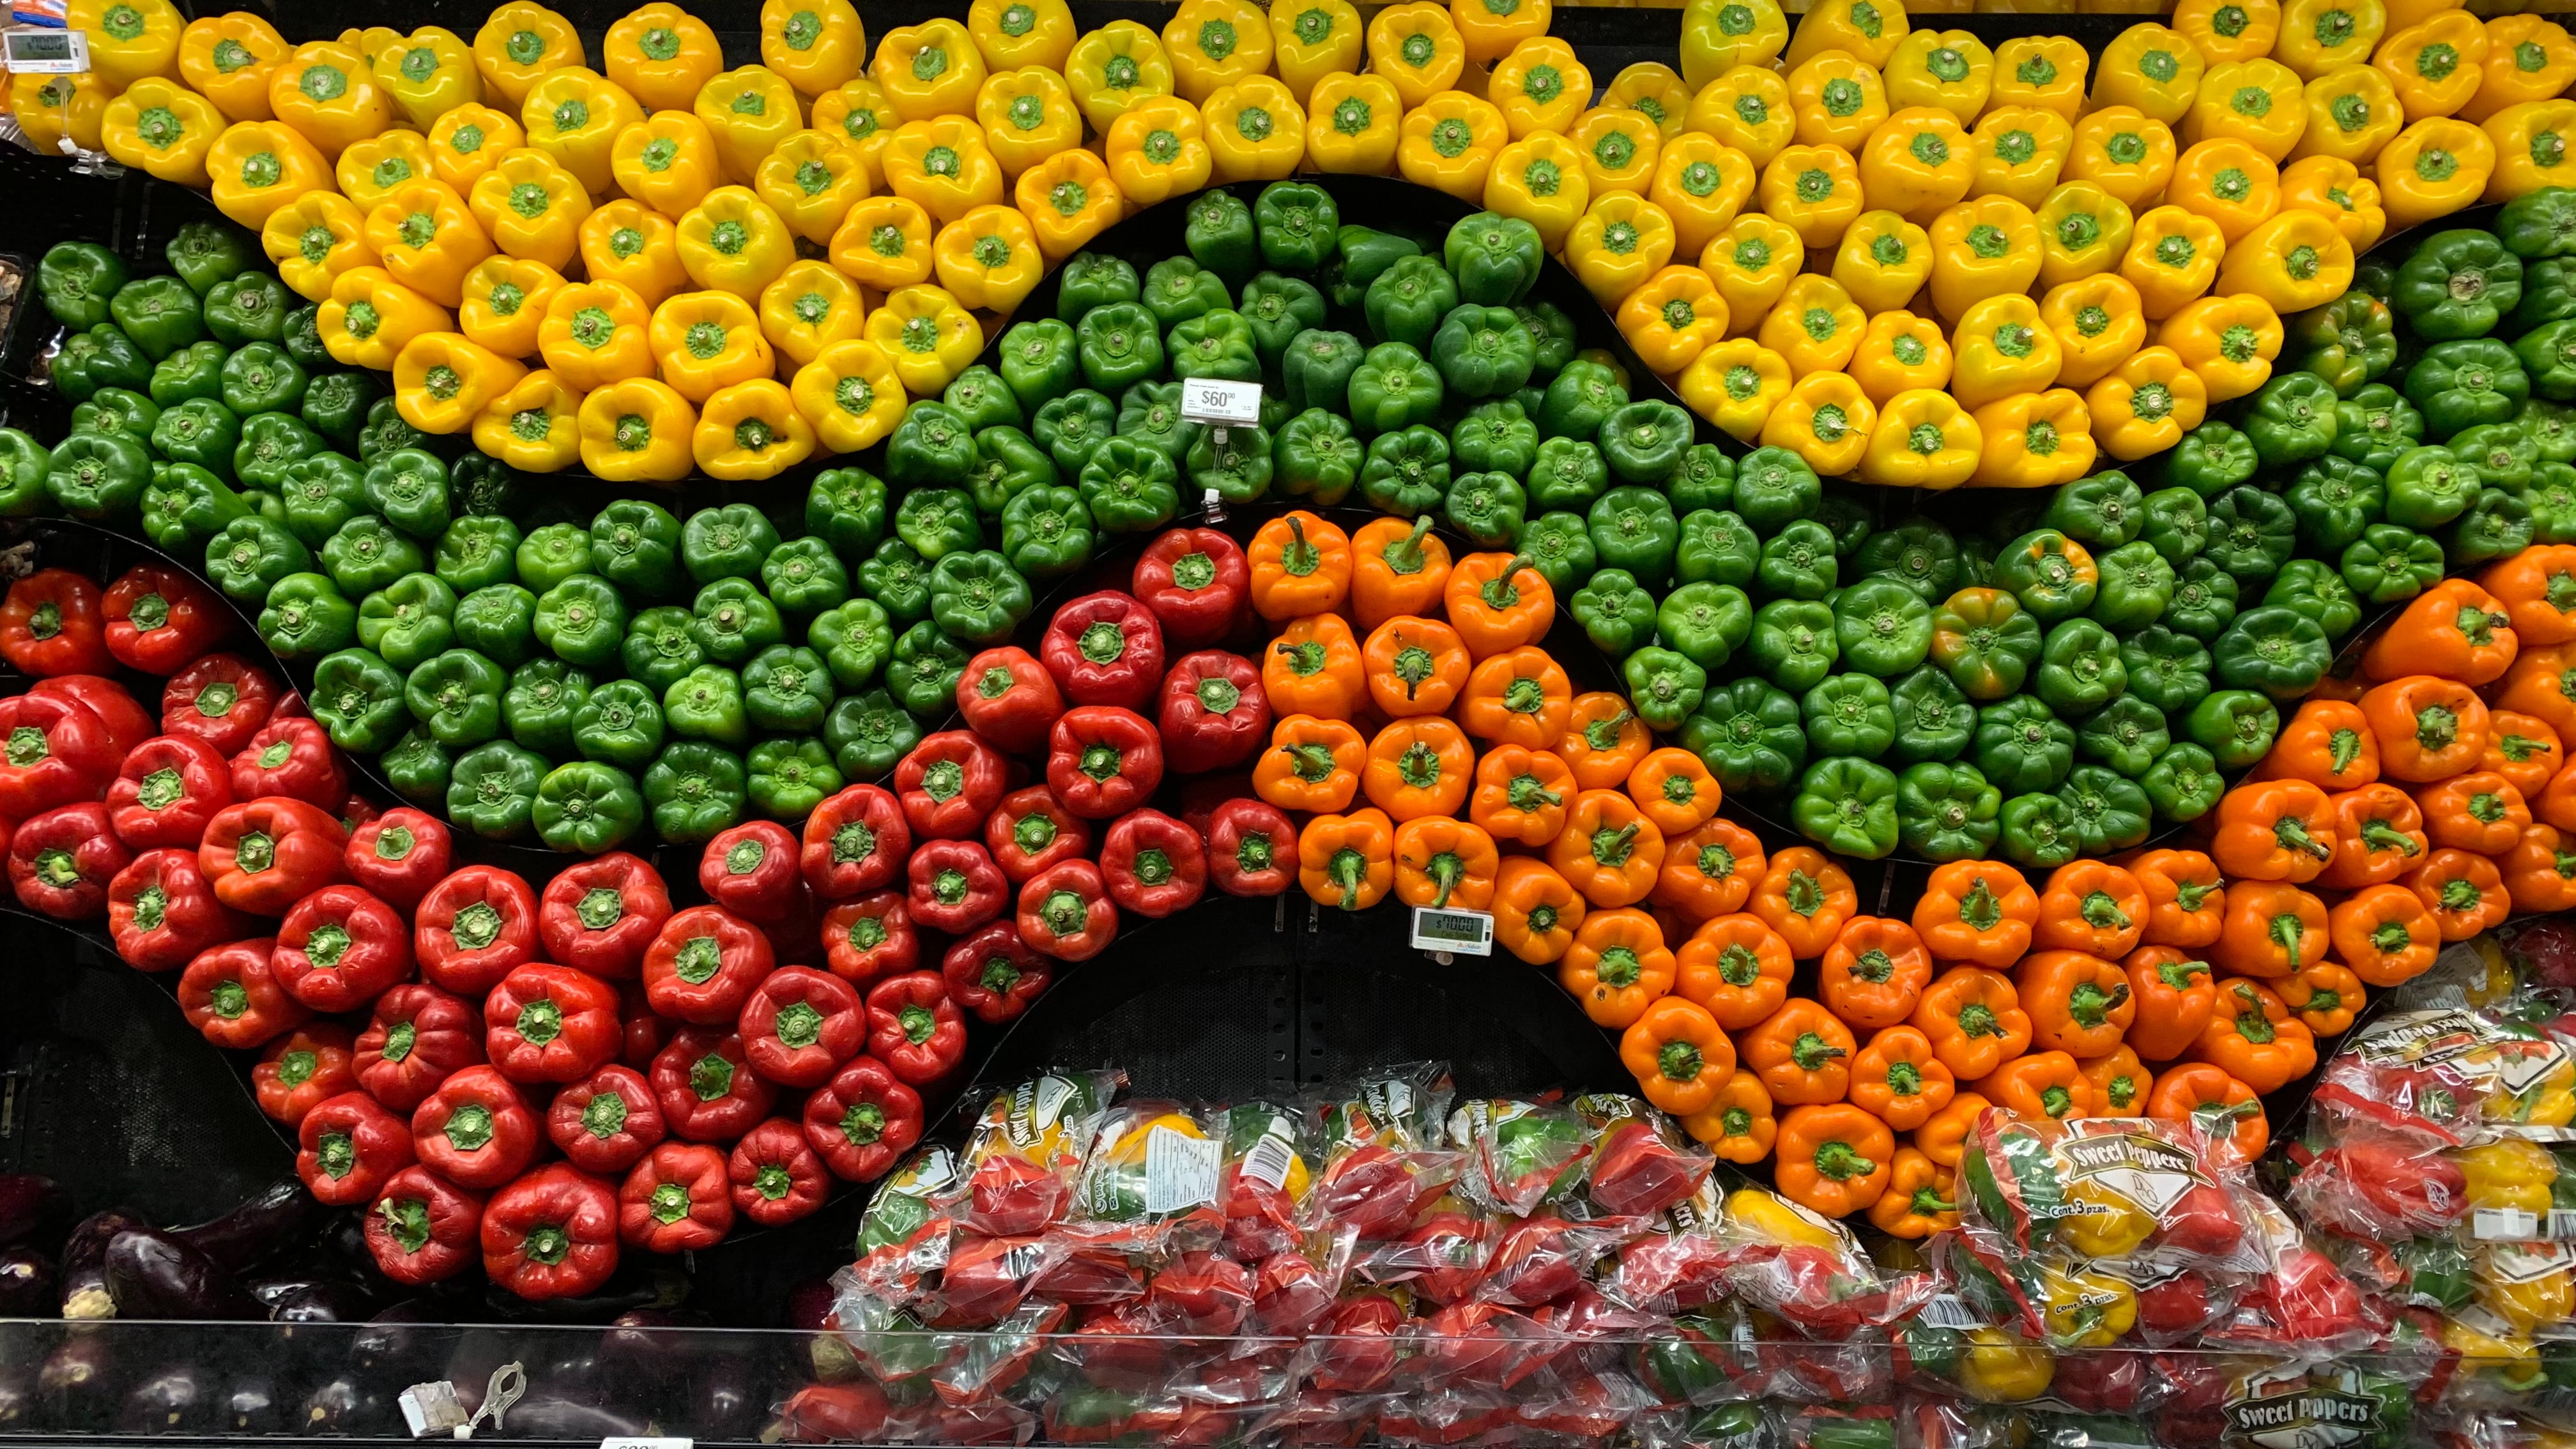 An example of grocery store merchandising using the power of three: stacks of bell peppers in red, yellow and green